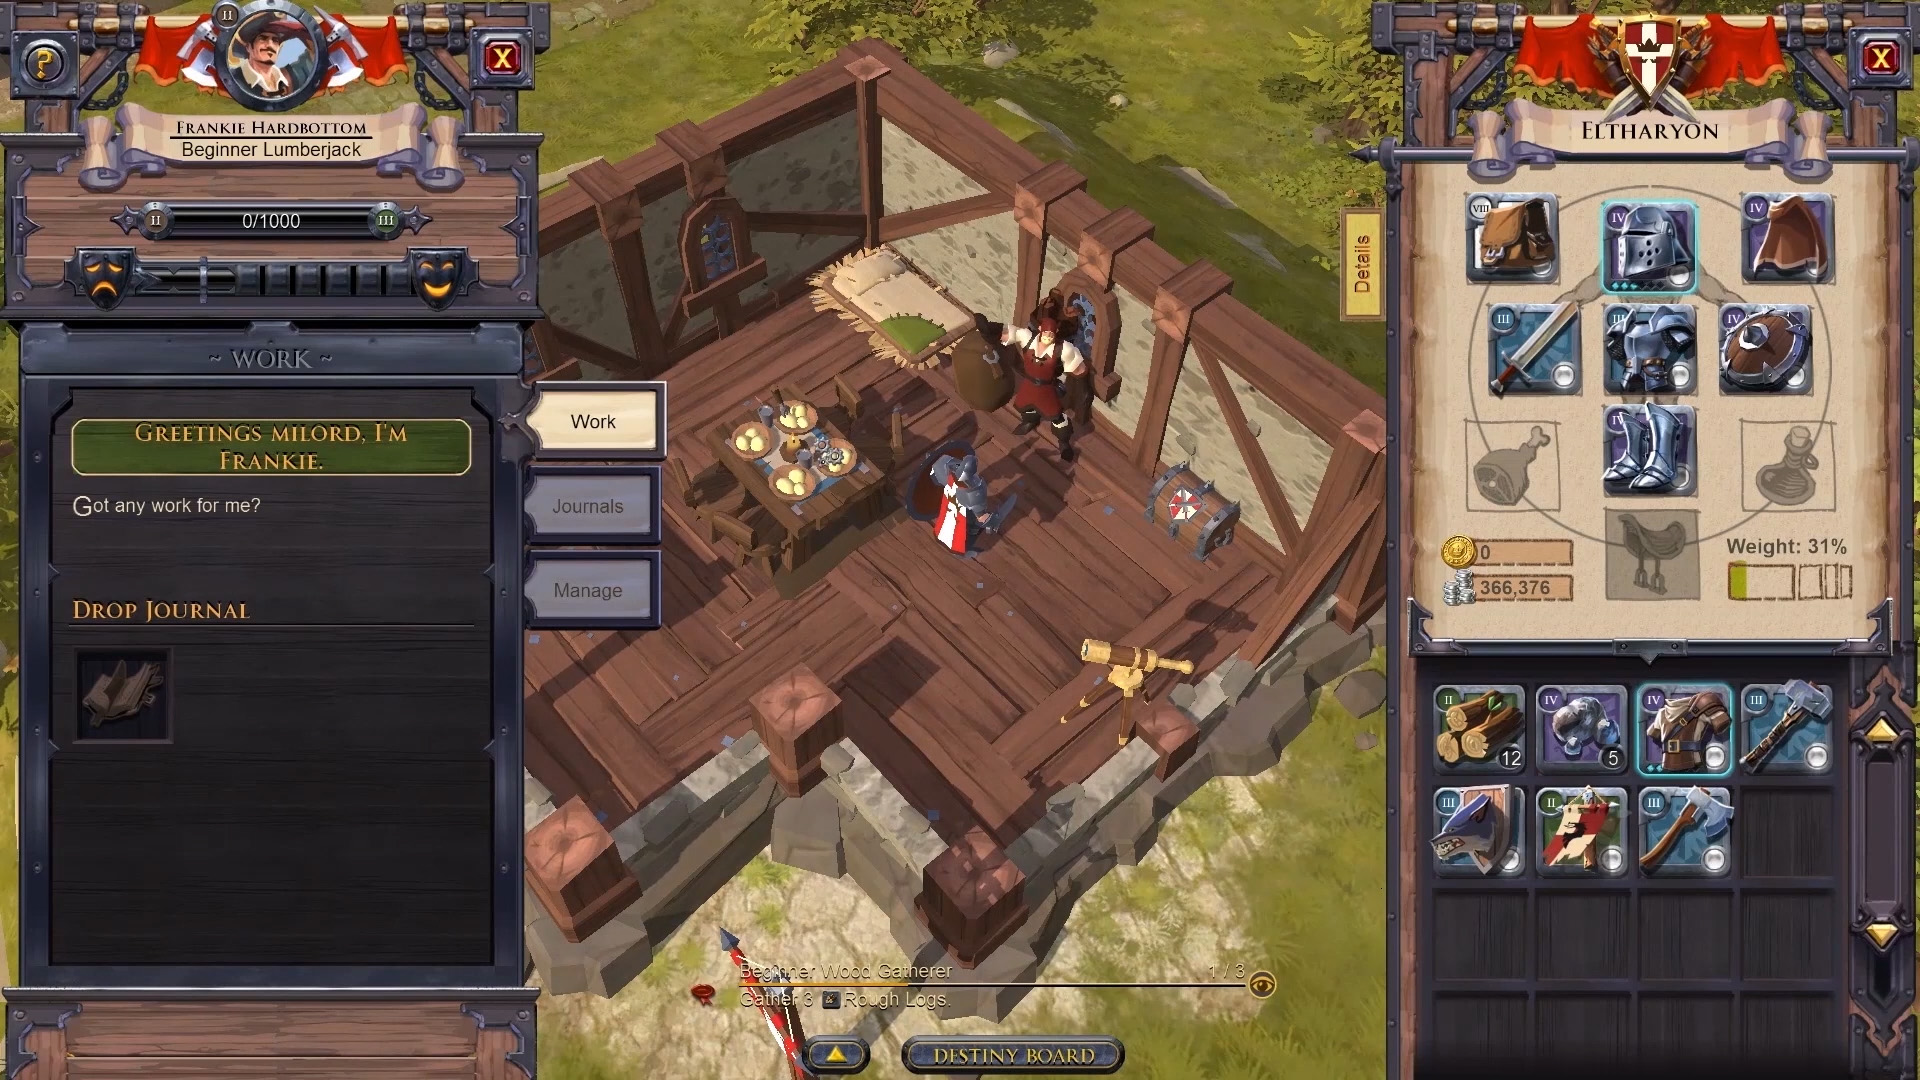 Played Albion Online - is my experience the norm? : r/MMORPG